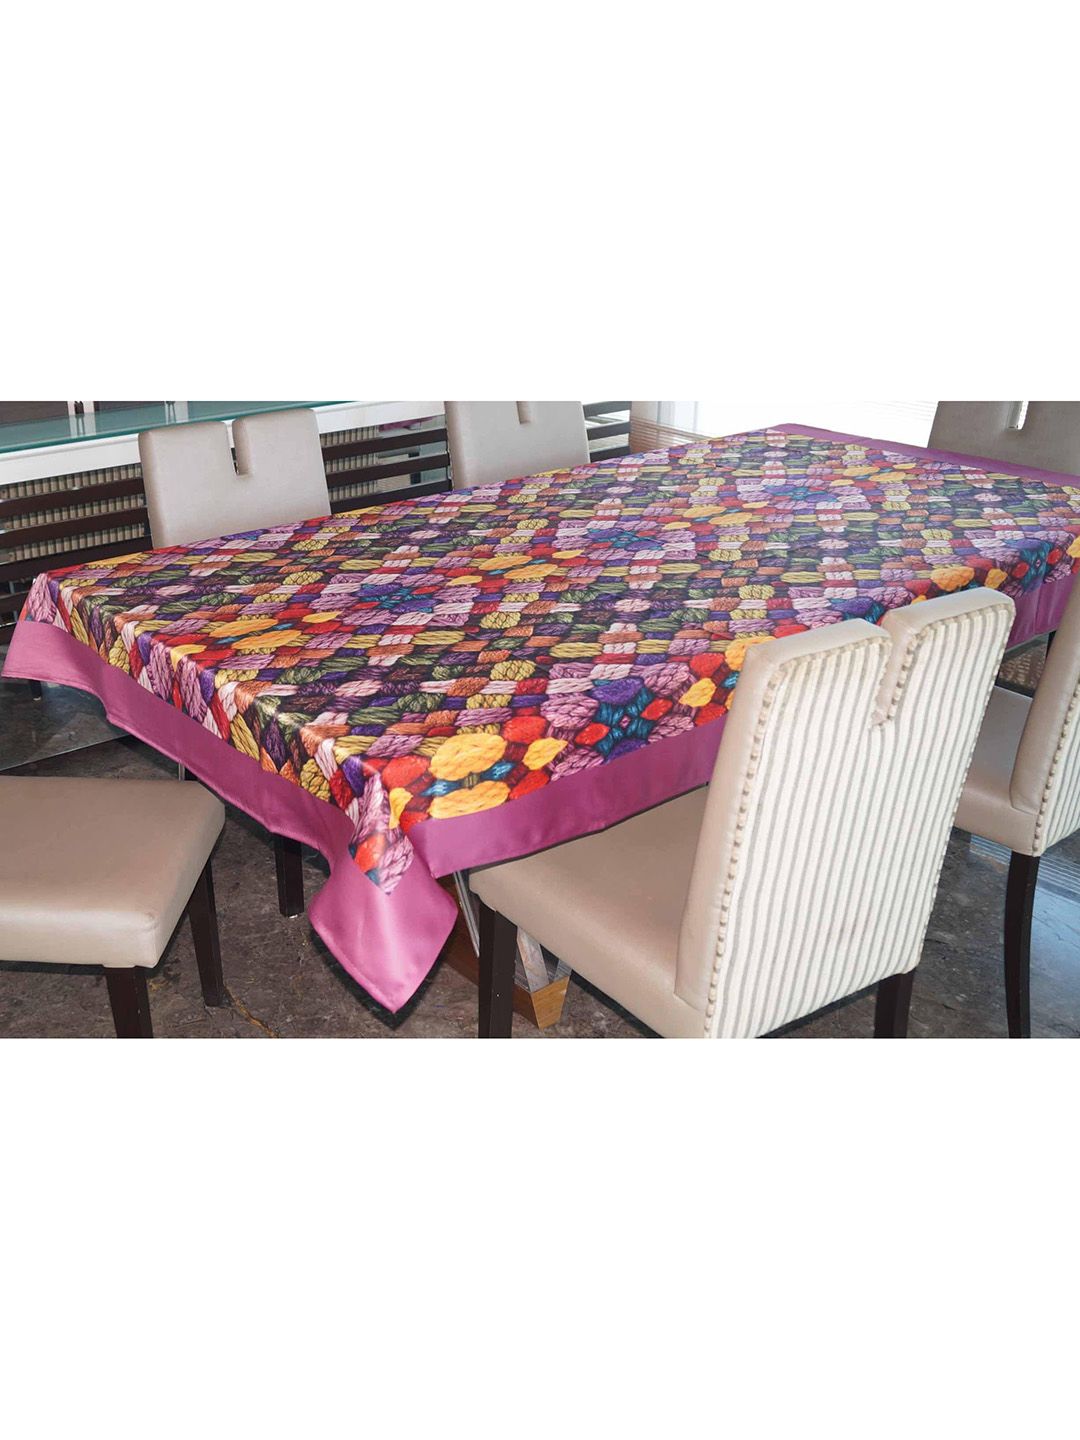 Lushomes Purple & Orange Printed 6-Seater Table Cover Price in India